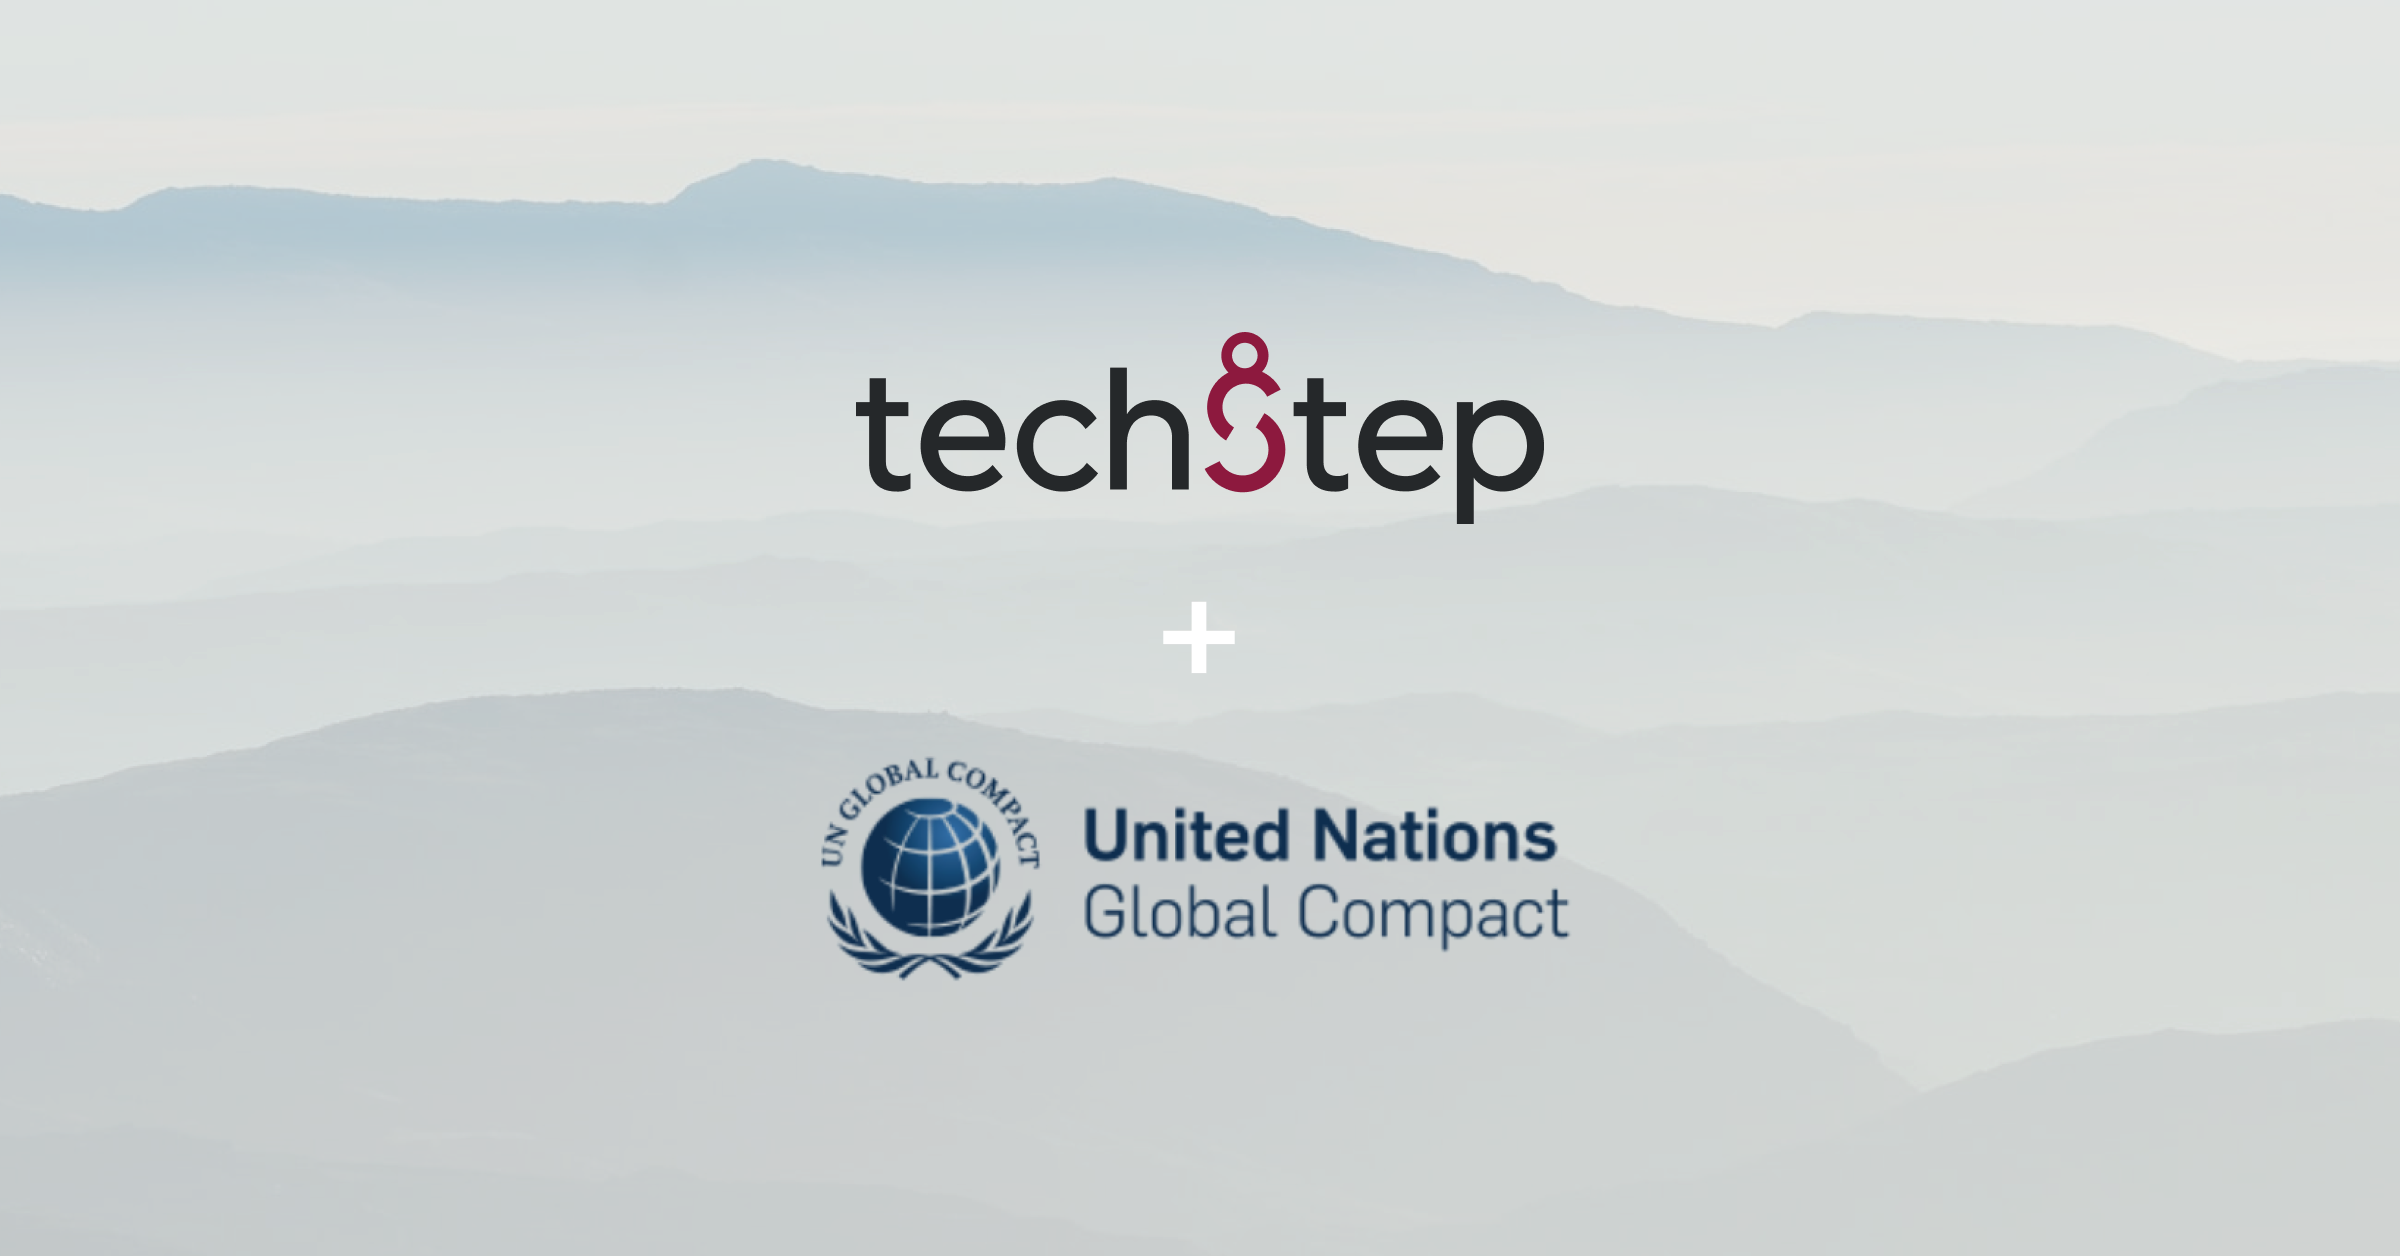 Techstep Commits to the Ten Principles of the UN Global Compact